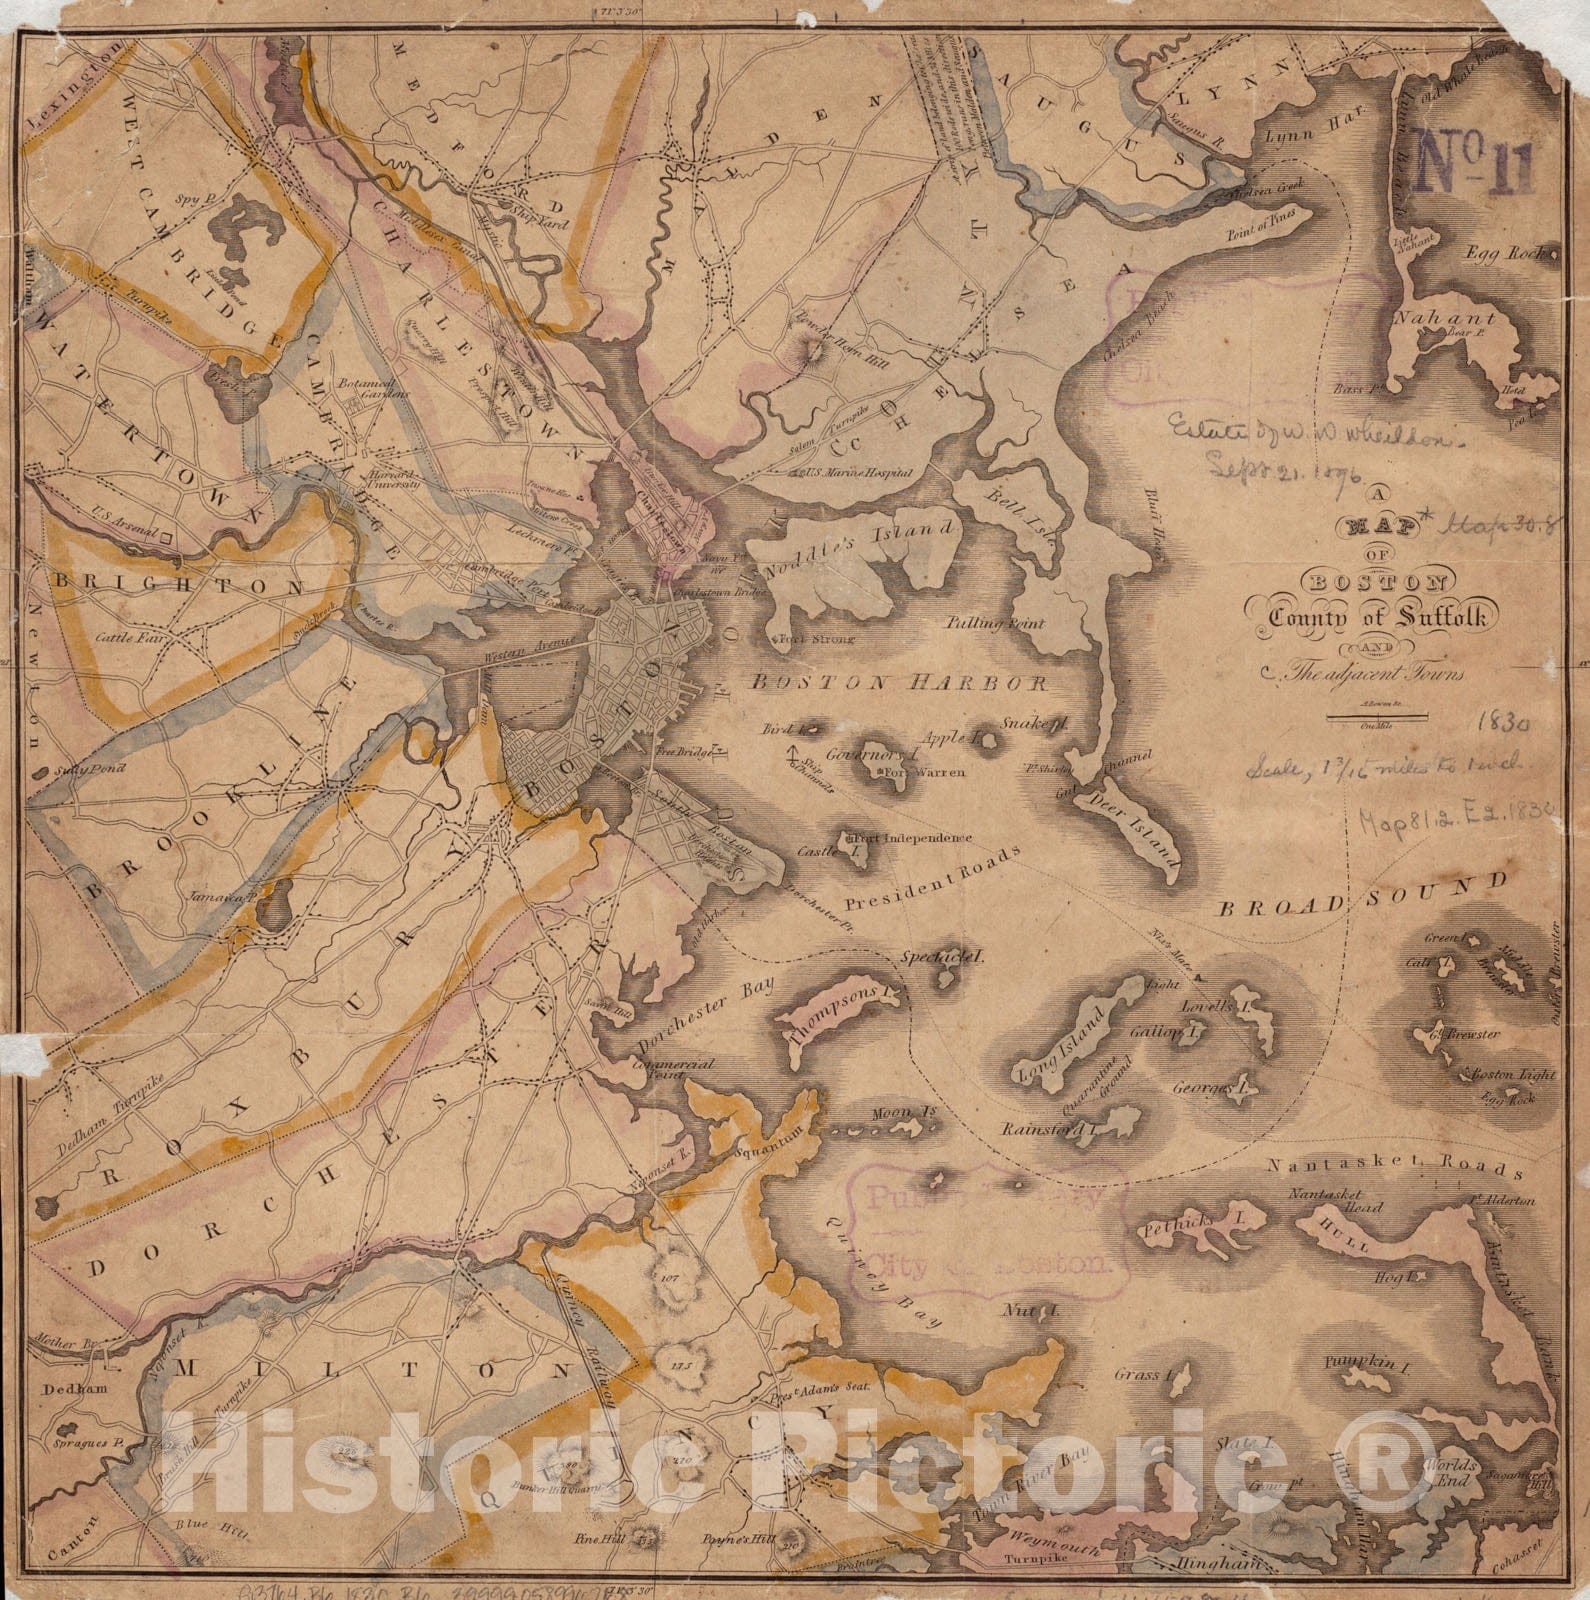 Historical Map, 1830 A map of Boston, County of Suffolk and The Adjacent Towns, Vintage Wall Art